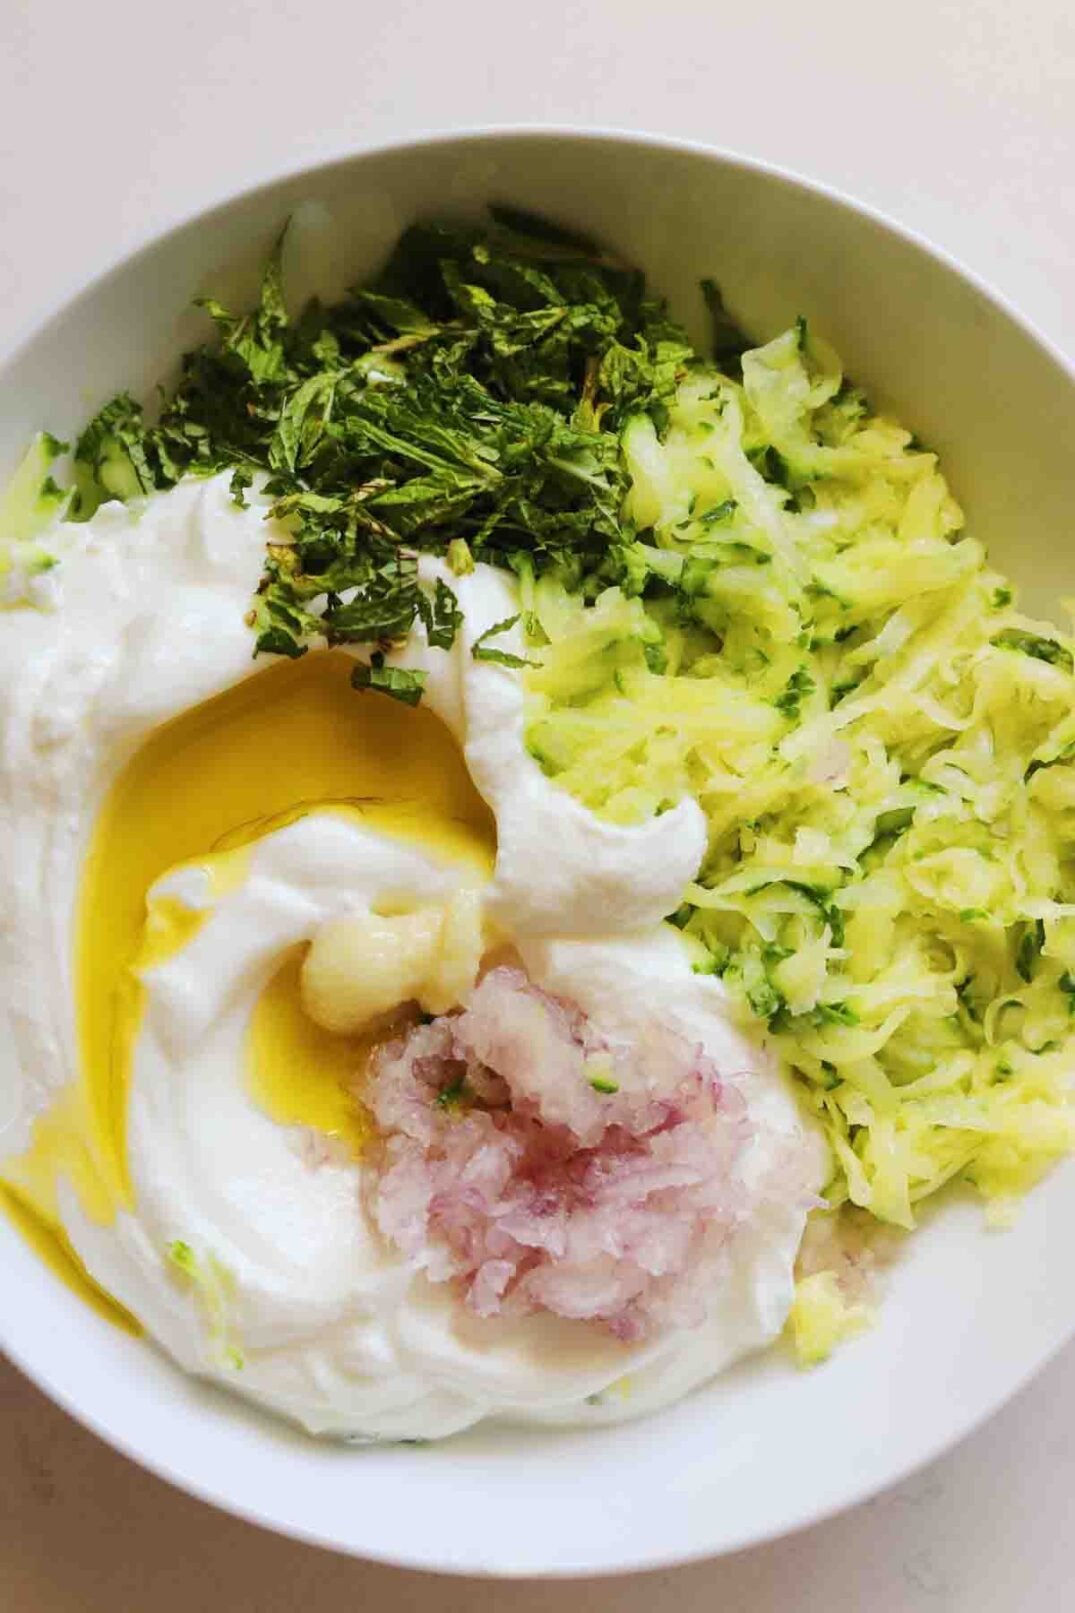 green herbs, pink shallot, white yogurt and yellow olive oil in a white bowl.